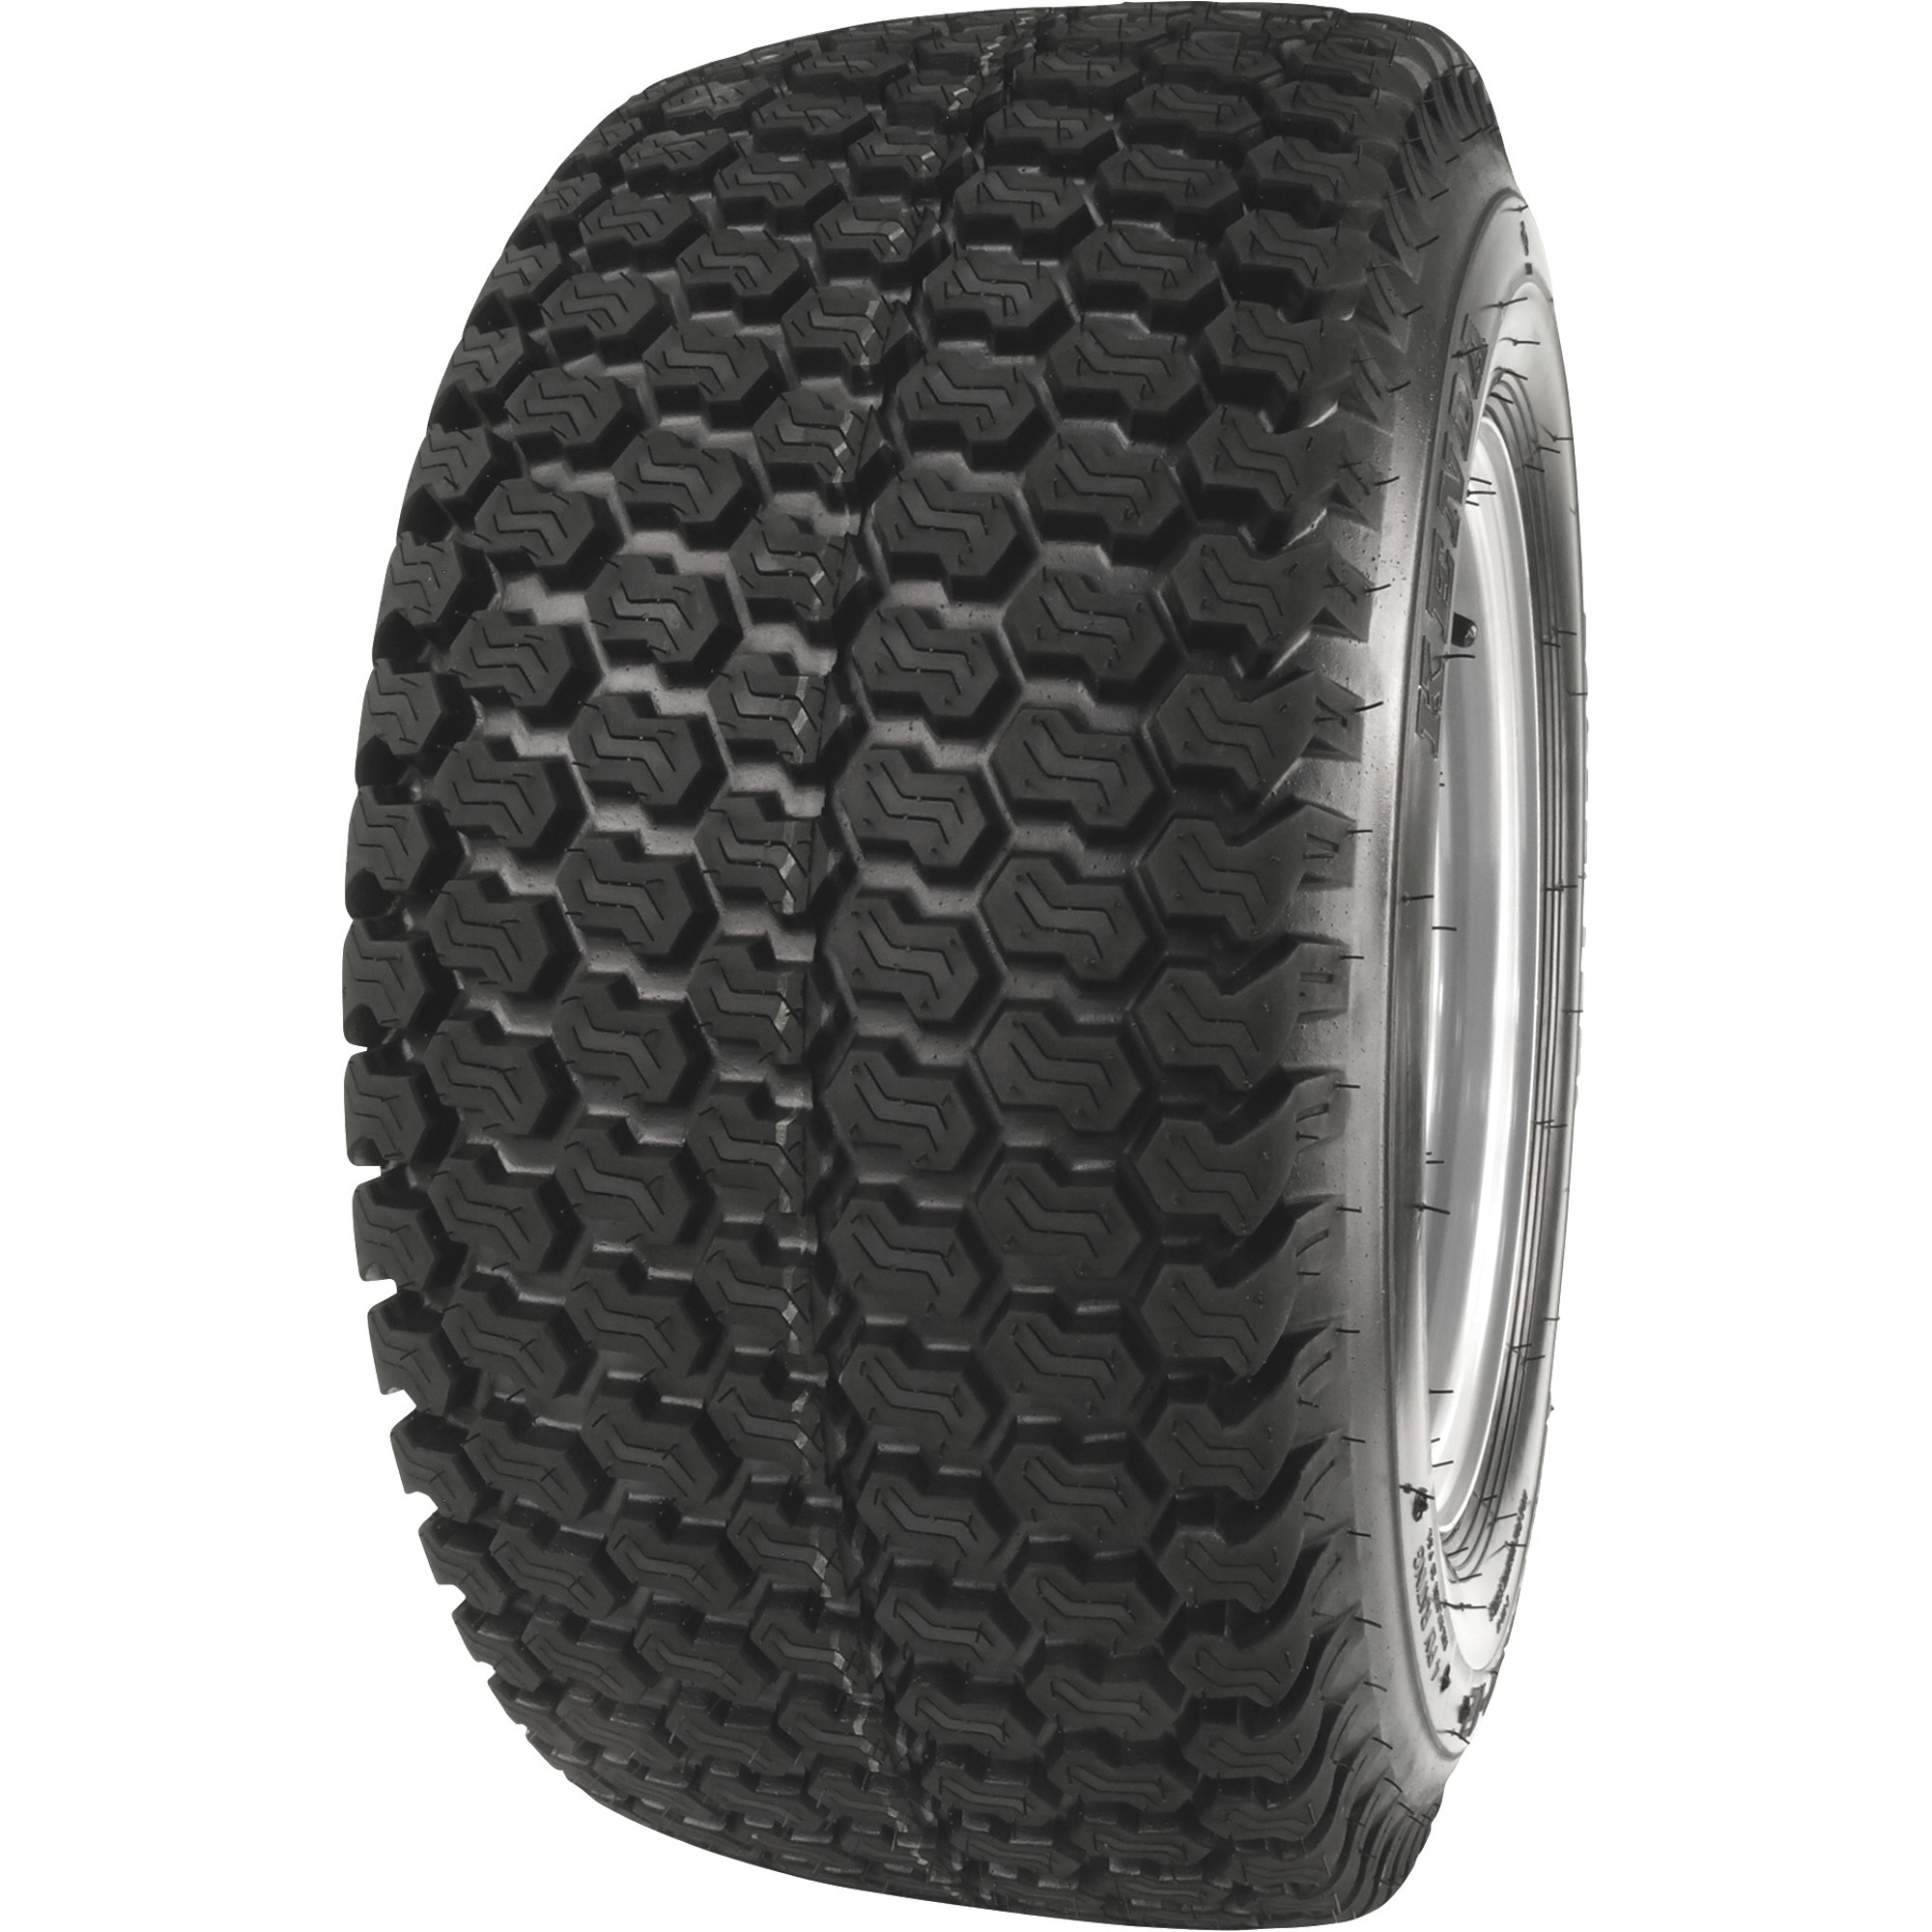 Kenda Lawn and Garden Tractor Tubeless Replacement Turf Tire â 23 x 850-12